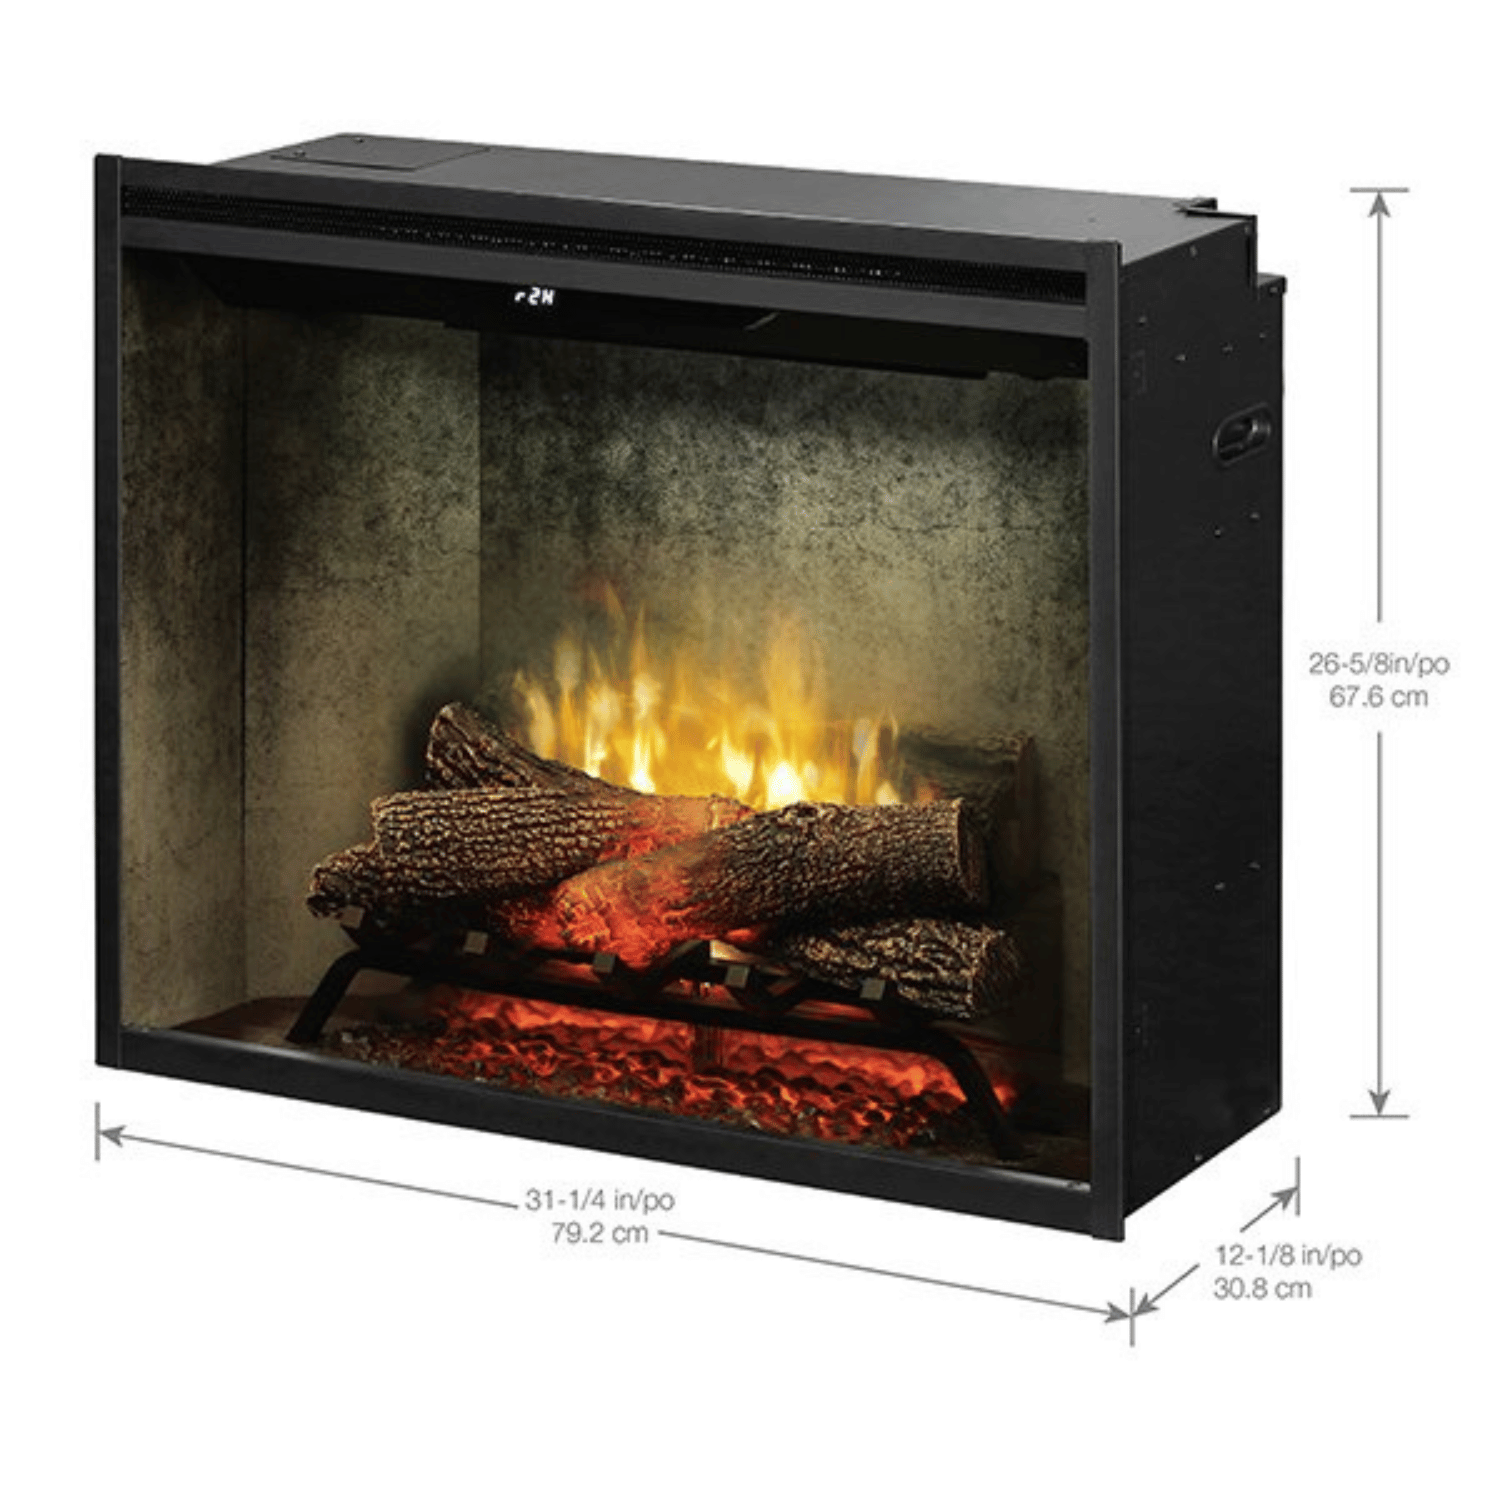 Insert fireplace Revillusion 30″ Weathered Concrete – Dimplex